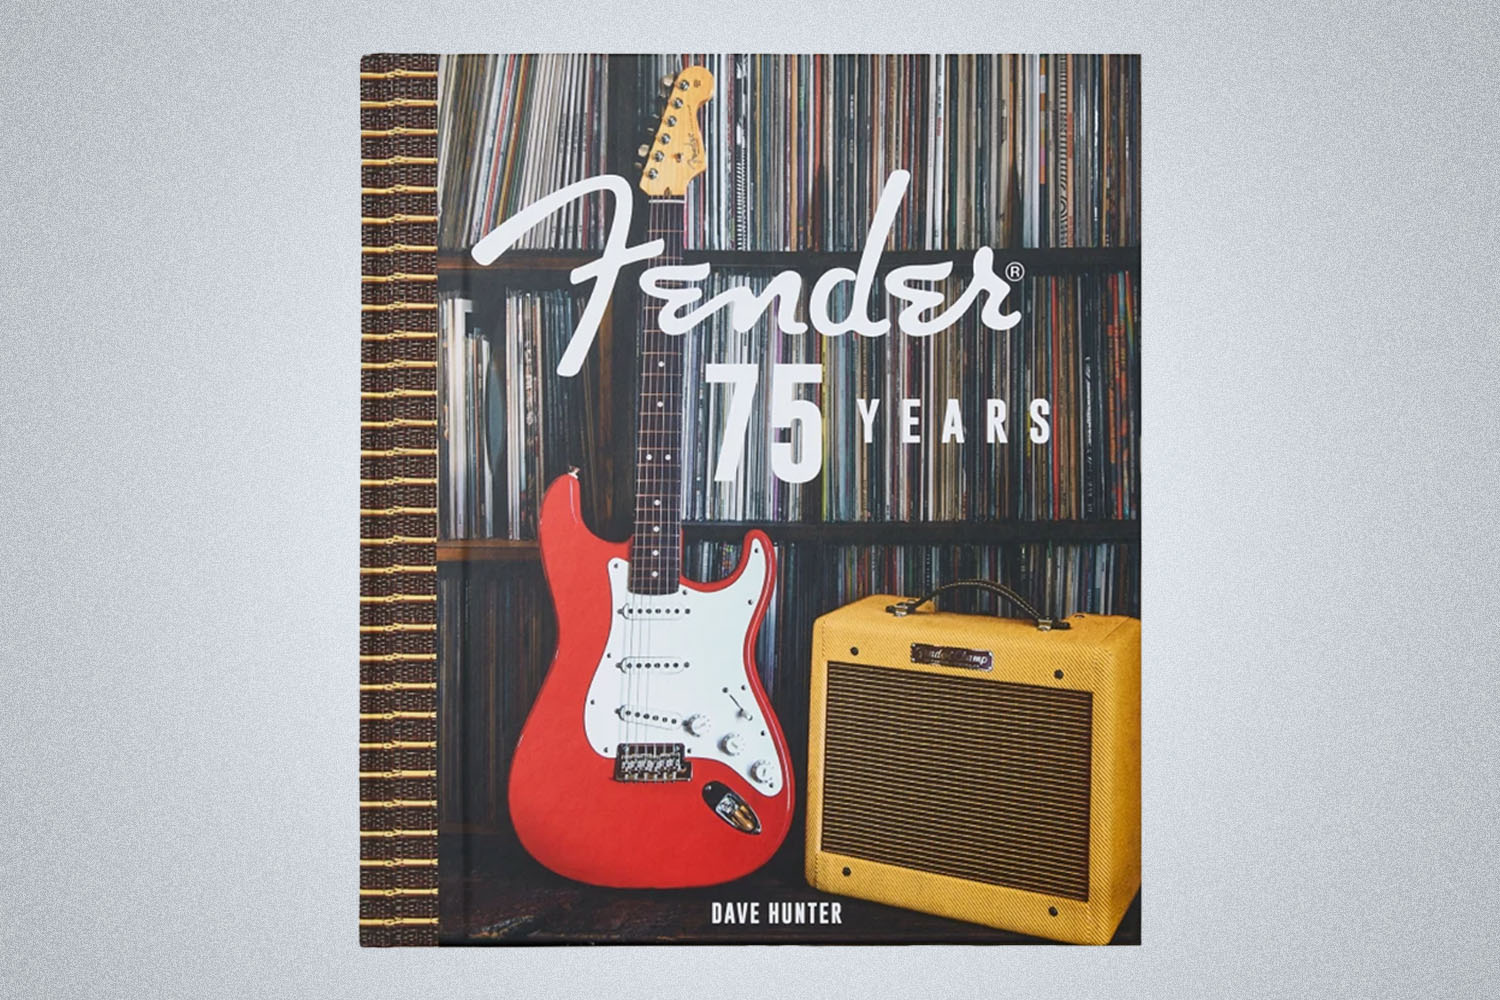 A Fender book from Bespoke Post on a grey background